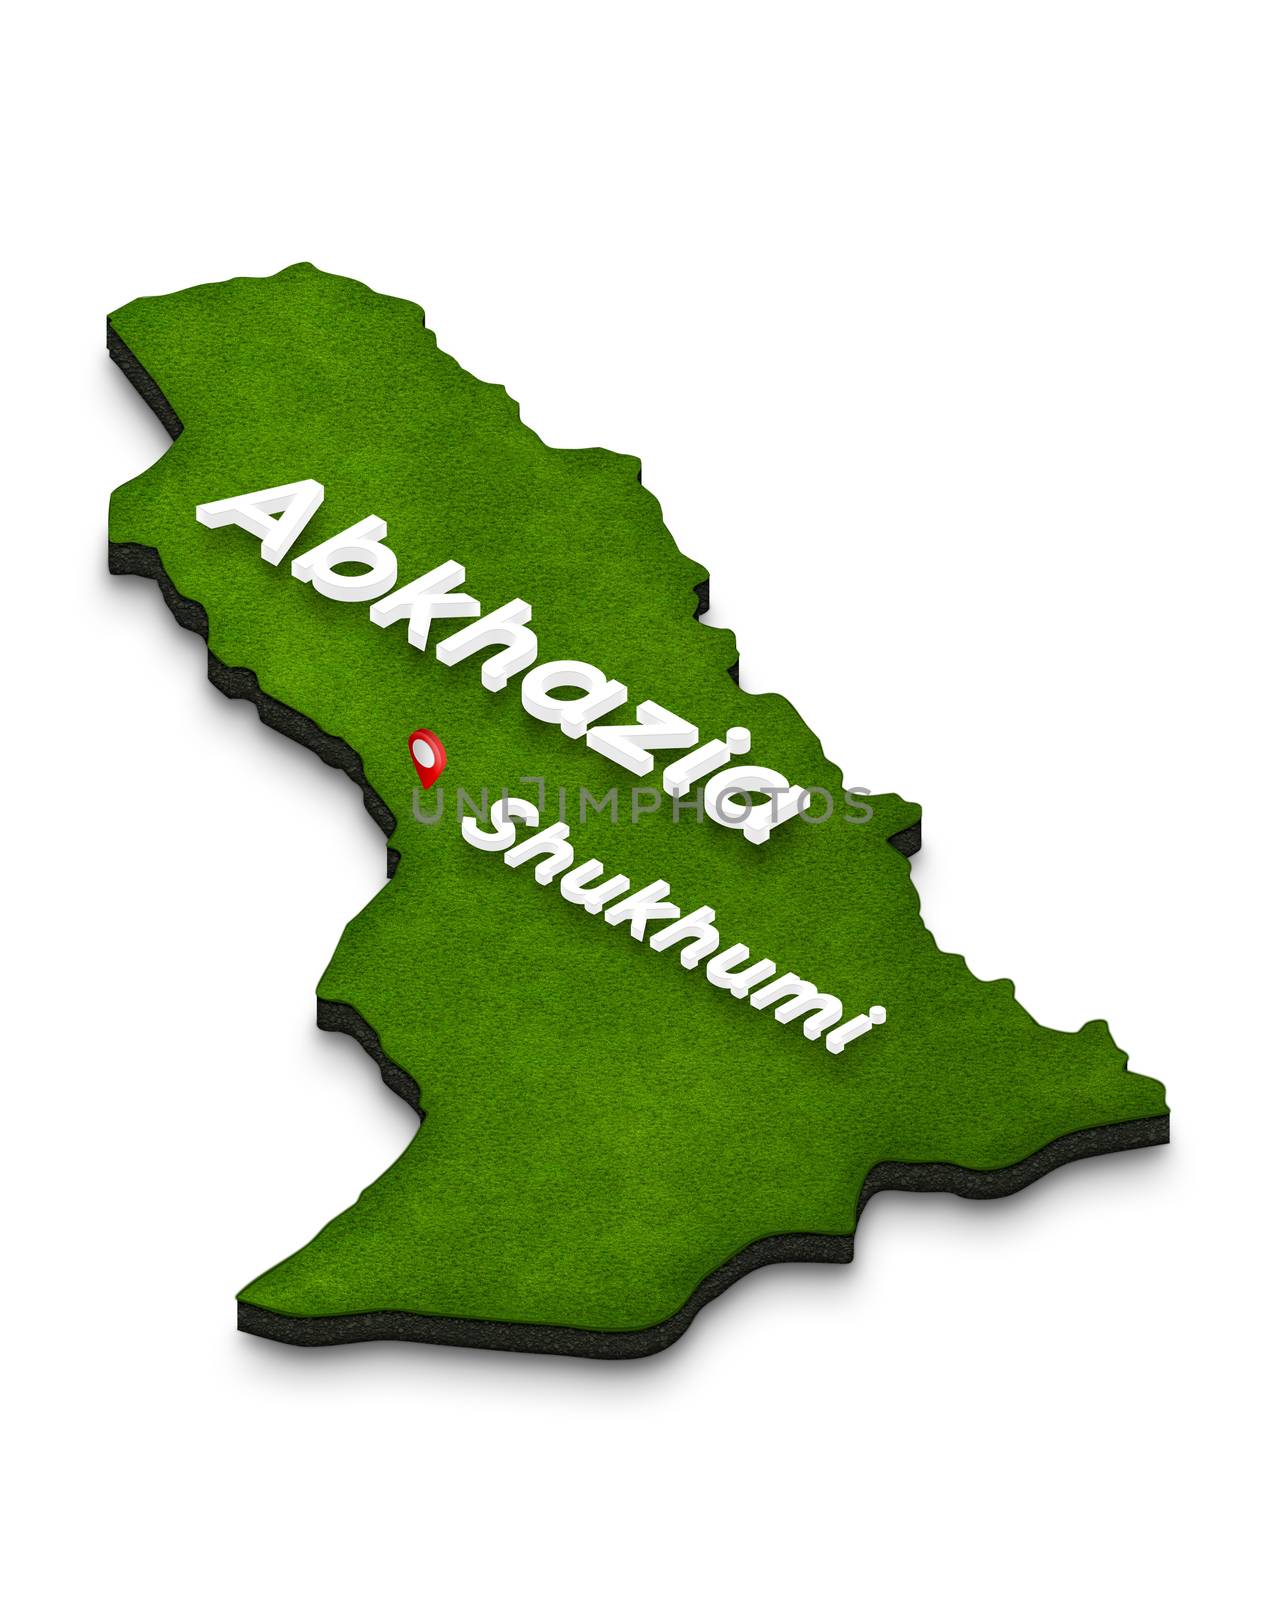 Illustration of a green ground map of Abkhazia on white isolated background. Left 3D isometric perspective projection with the name of country and capital Shukhumi.